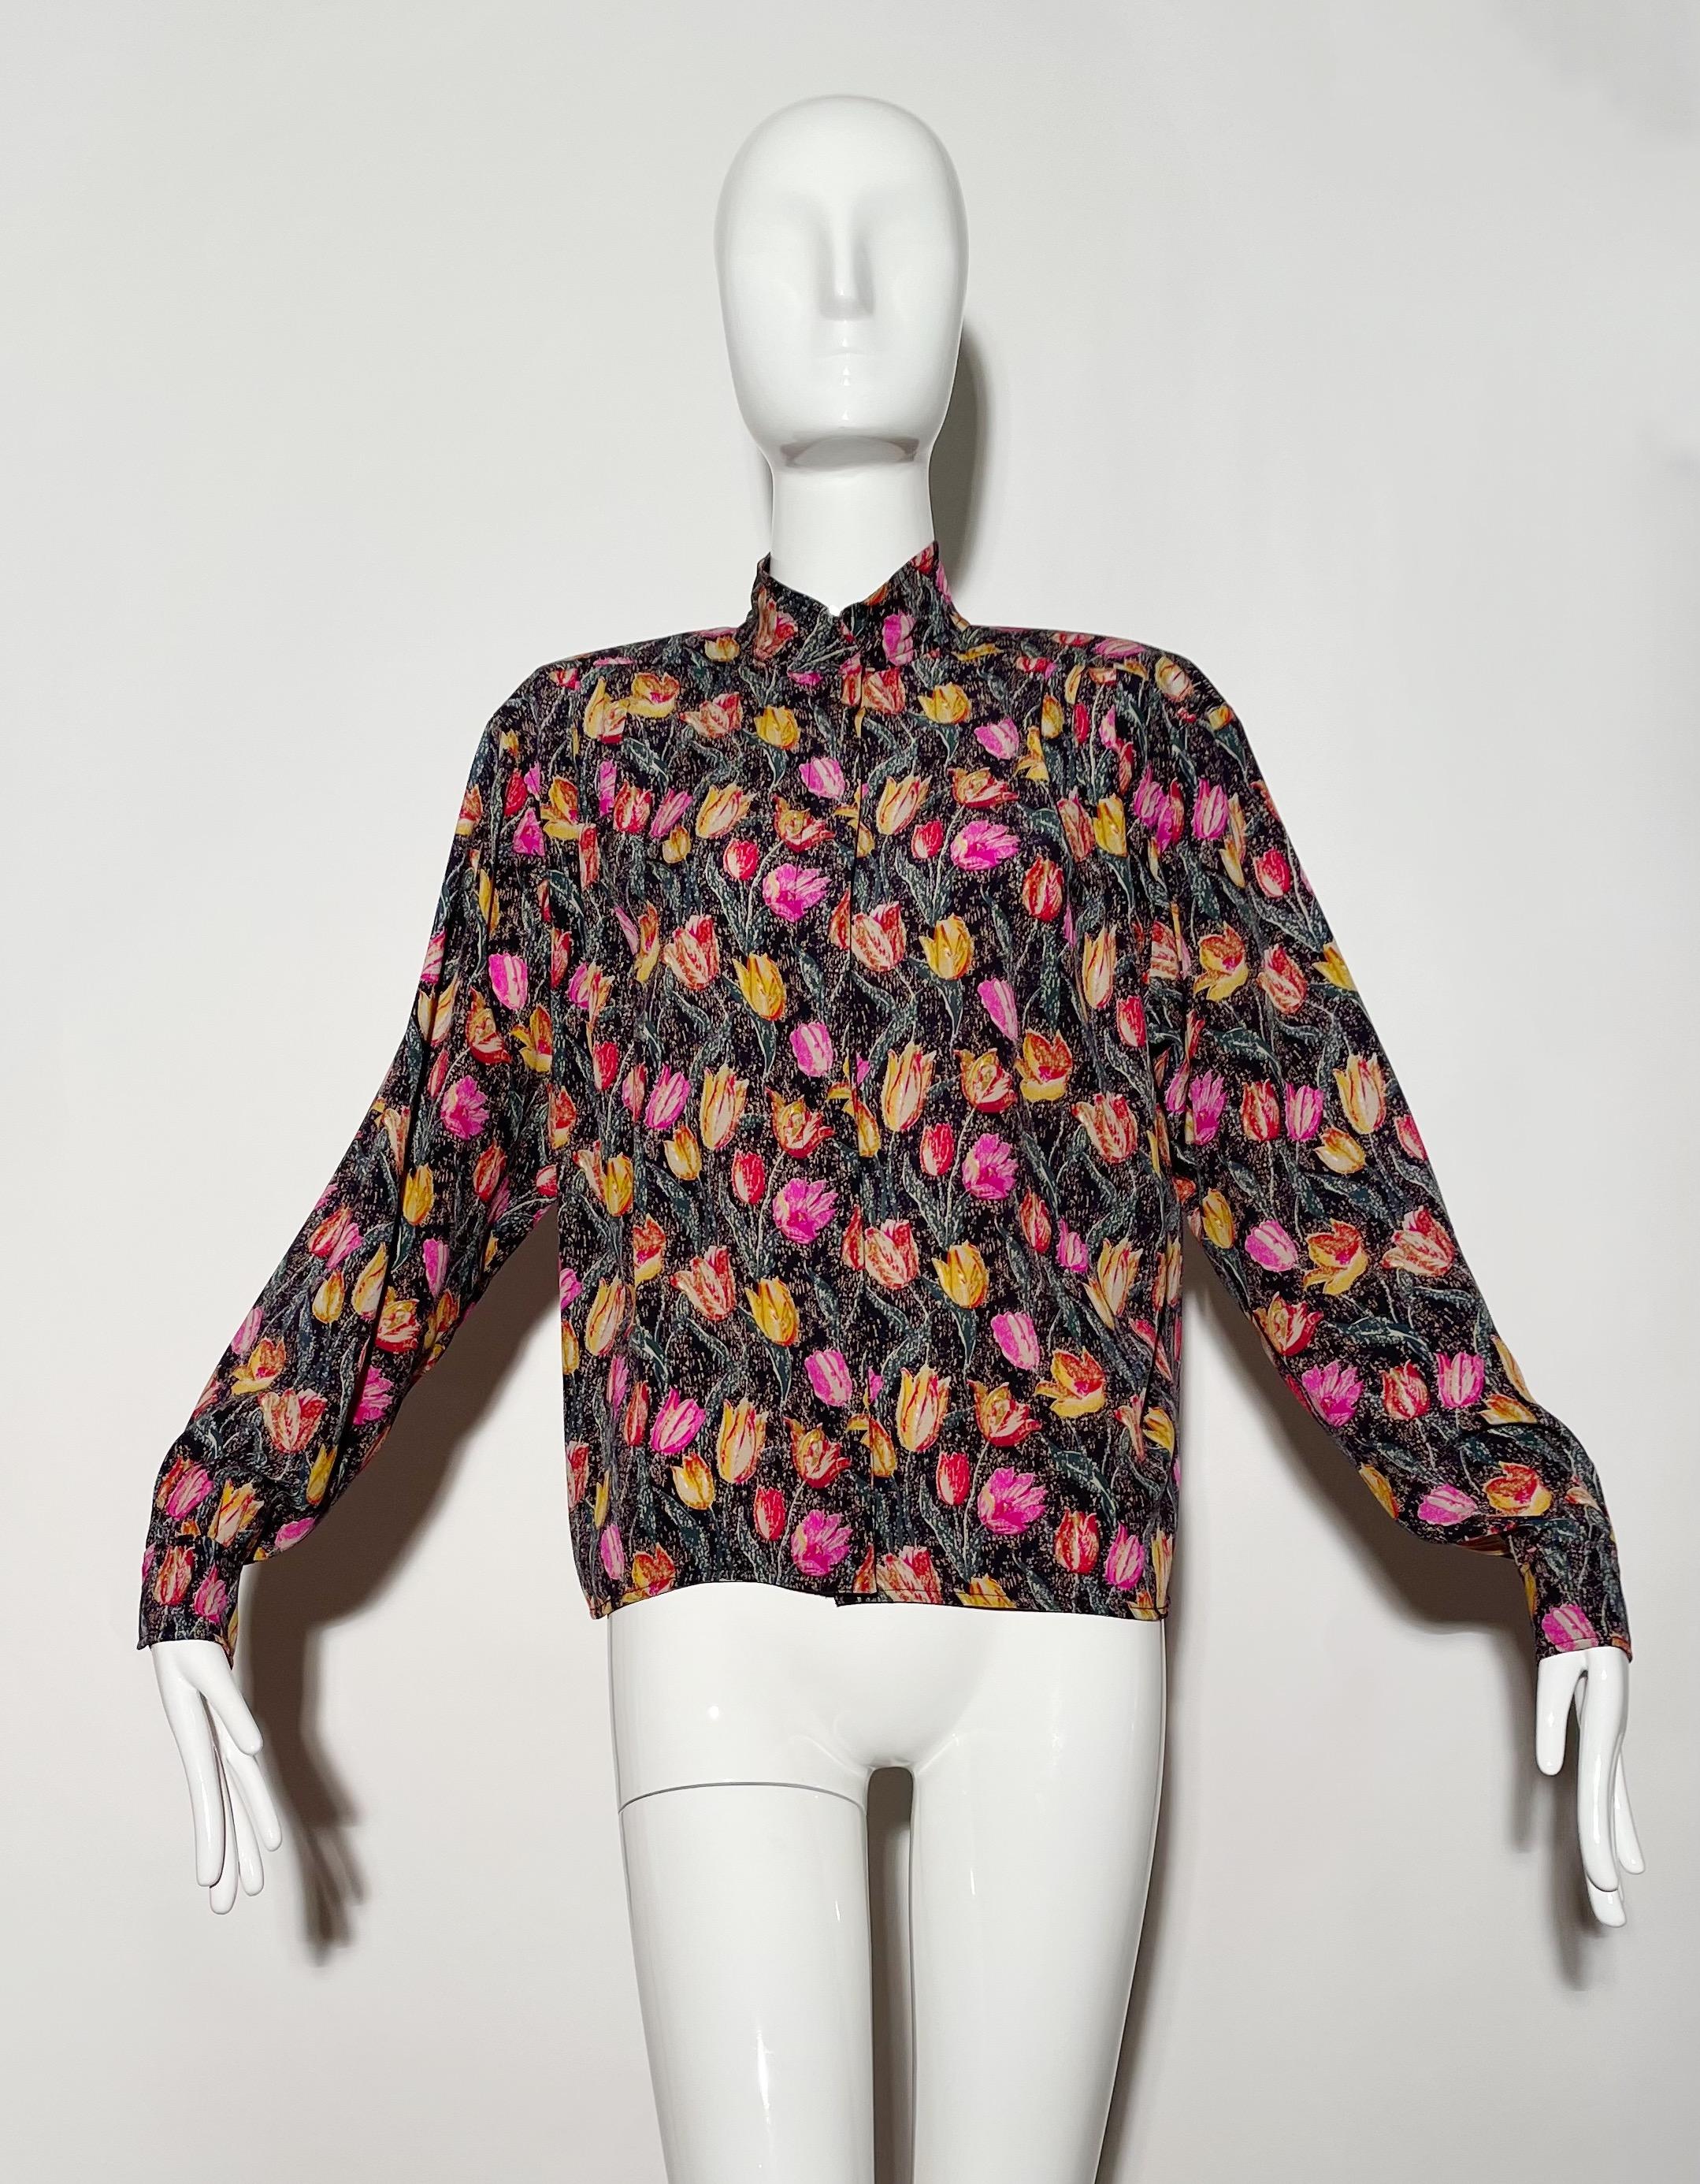 Navy floral blouse. Front buttons. Shoulder pads. Mandarin collar. Silk. Made in Italy. 
*Condition: excellent vintage condition. No visible flaws.

Measurements Taken Laying Flat (inches)—
Shoulder to Shoulder: 18 in.
Bust: 40 in.
Sleeve Length: 